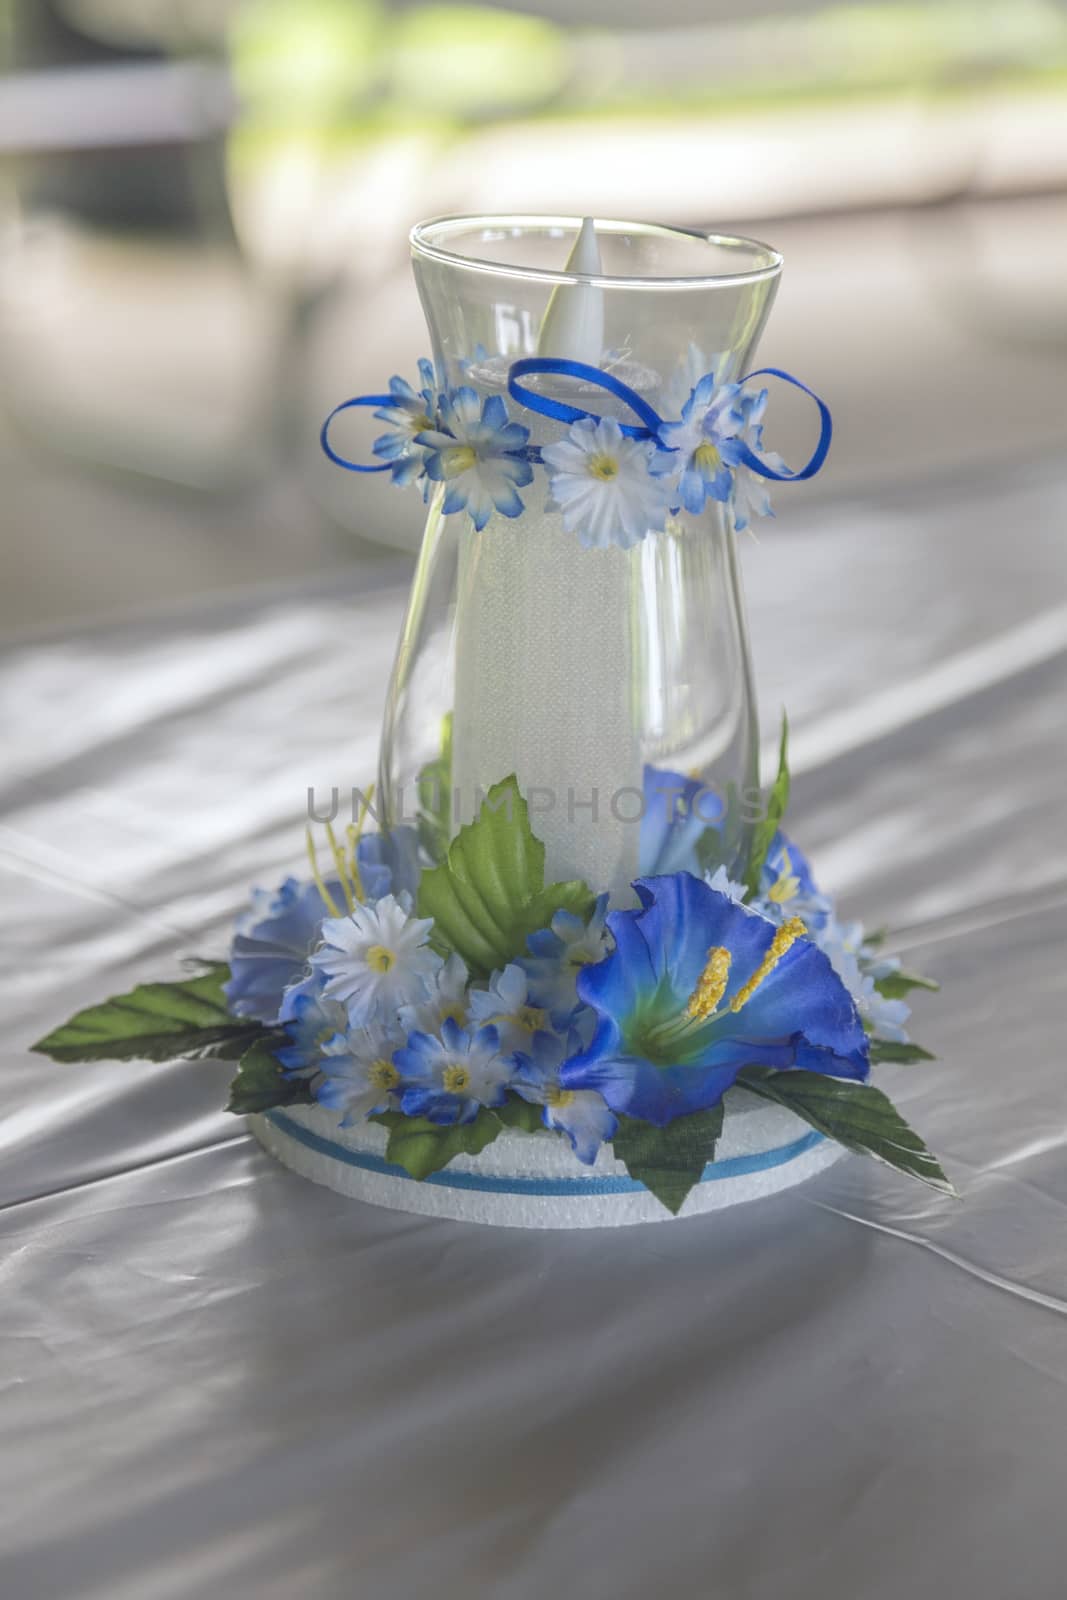 Candle in glass centerpiece. Cute blue flowers and ribbons adorn the glass. 
